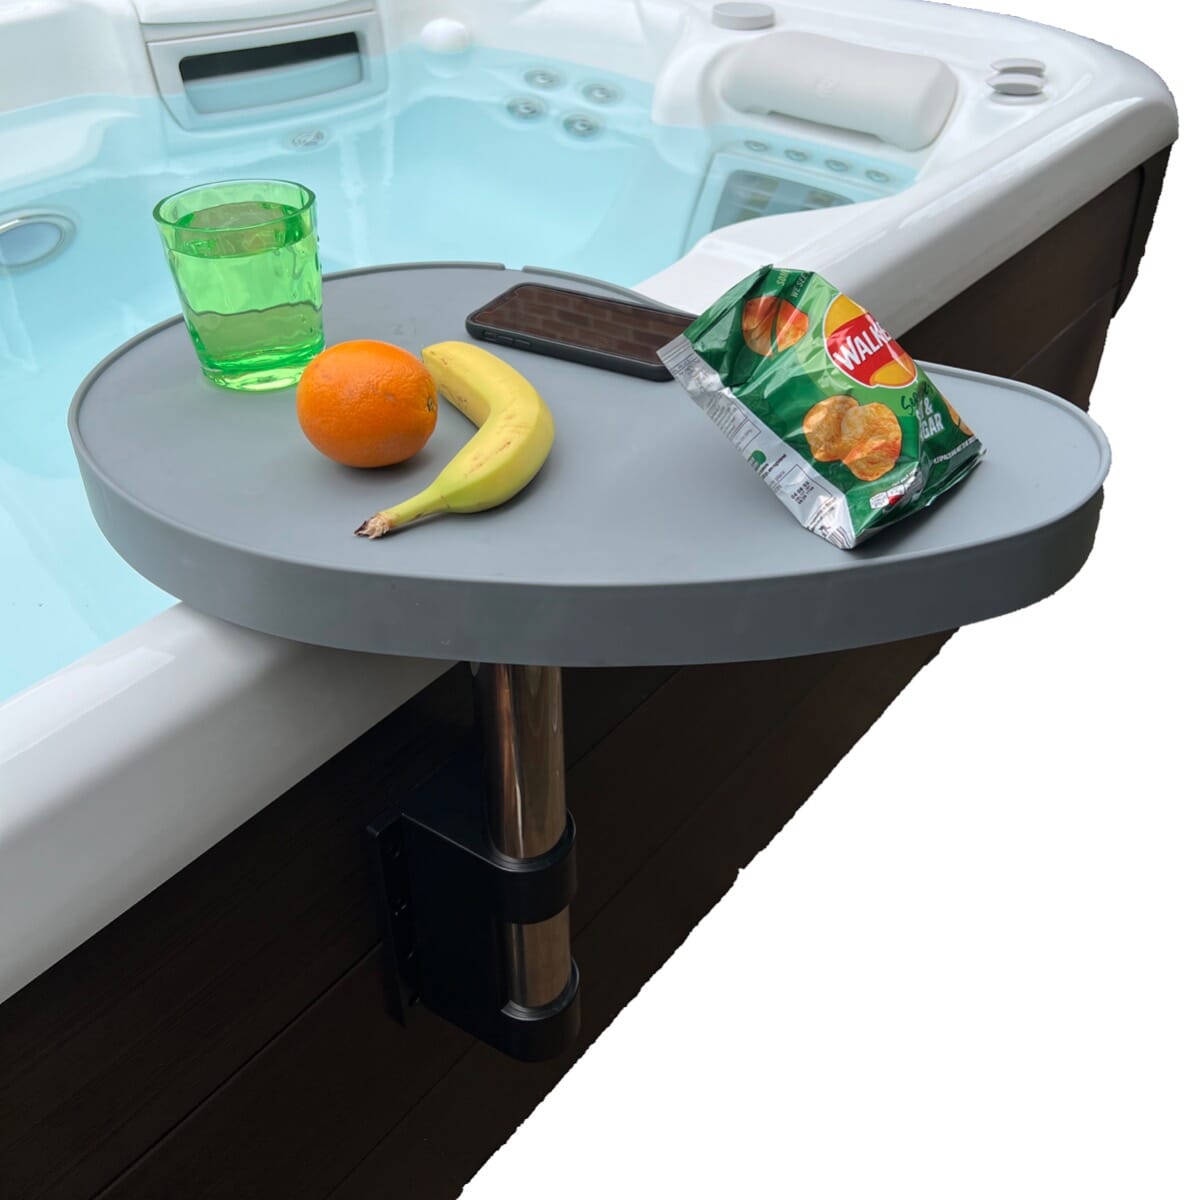 Kacsoo Leisure Spa Caddy Side Table Tray Hot Tub Towel Holder Snack Tray Phone and Tablet Stand 